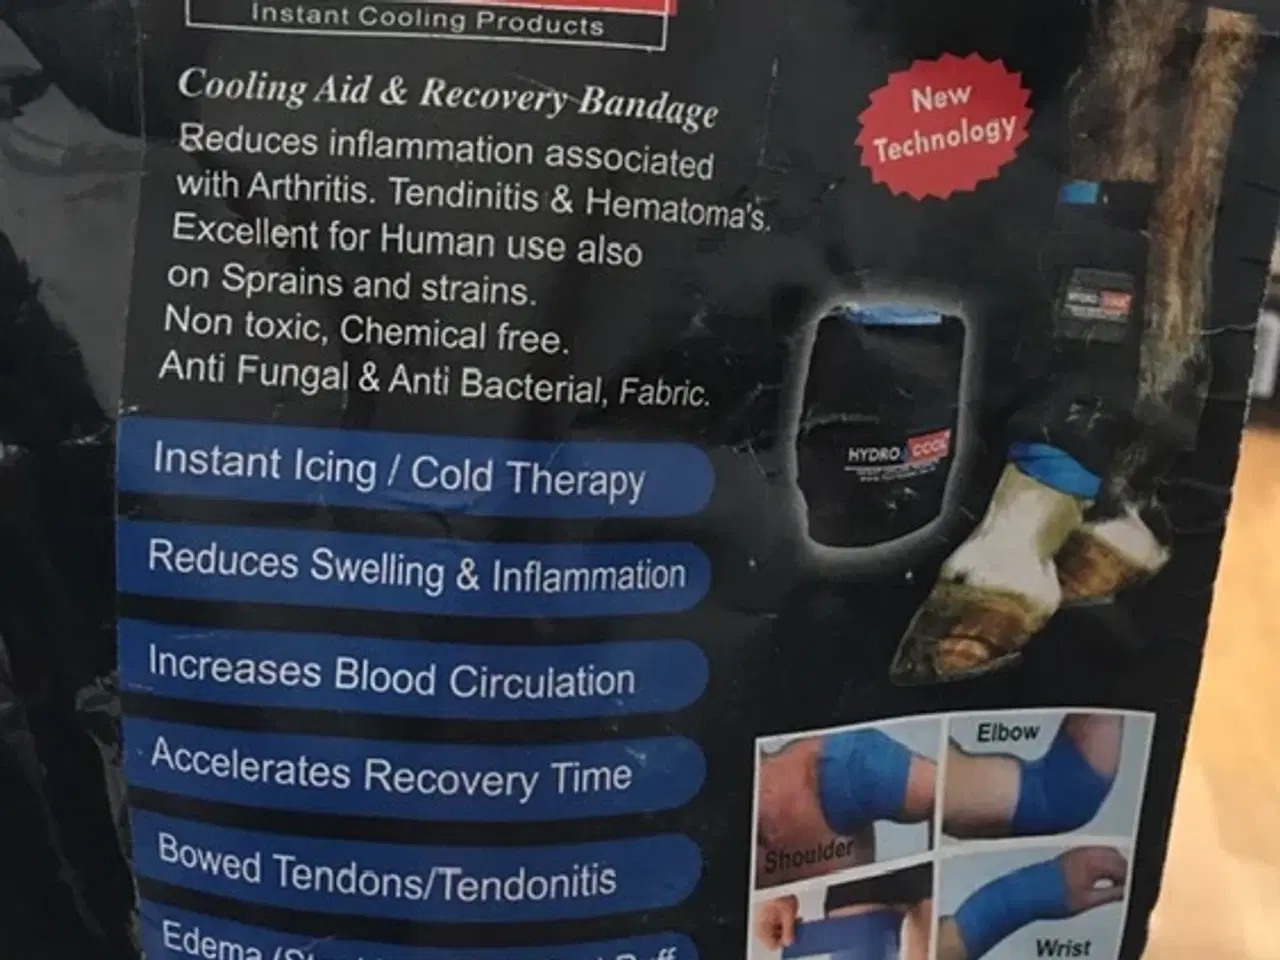 Billede 1 - Cooling Aid & Recovery bandage